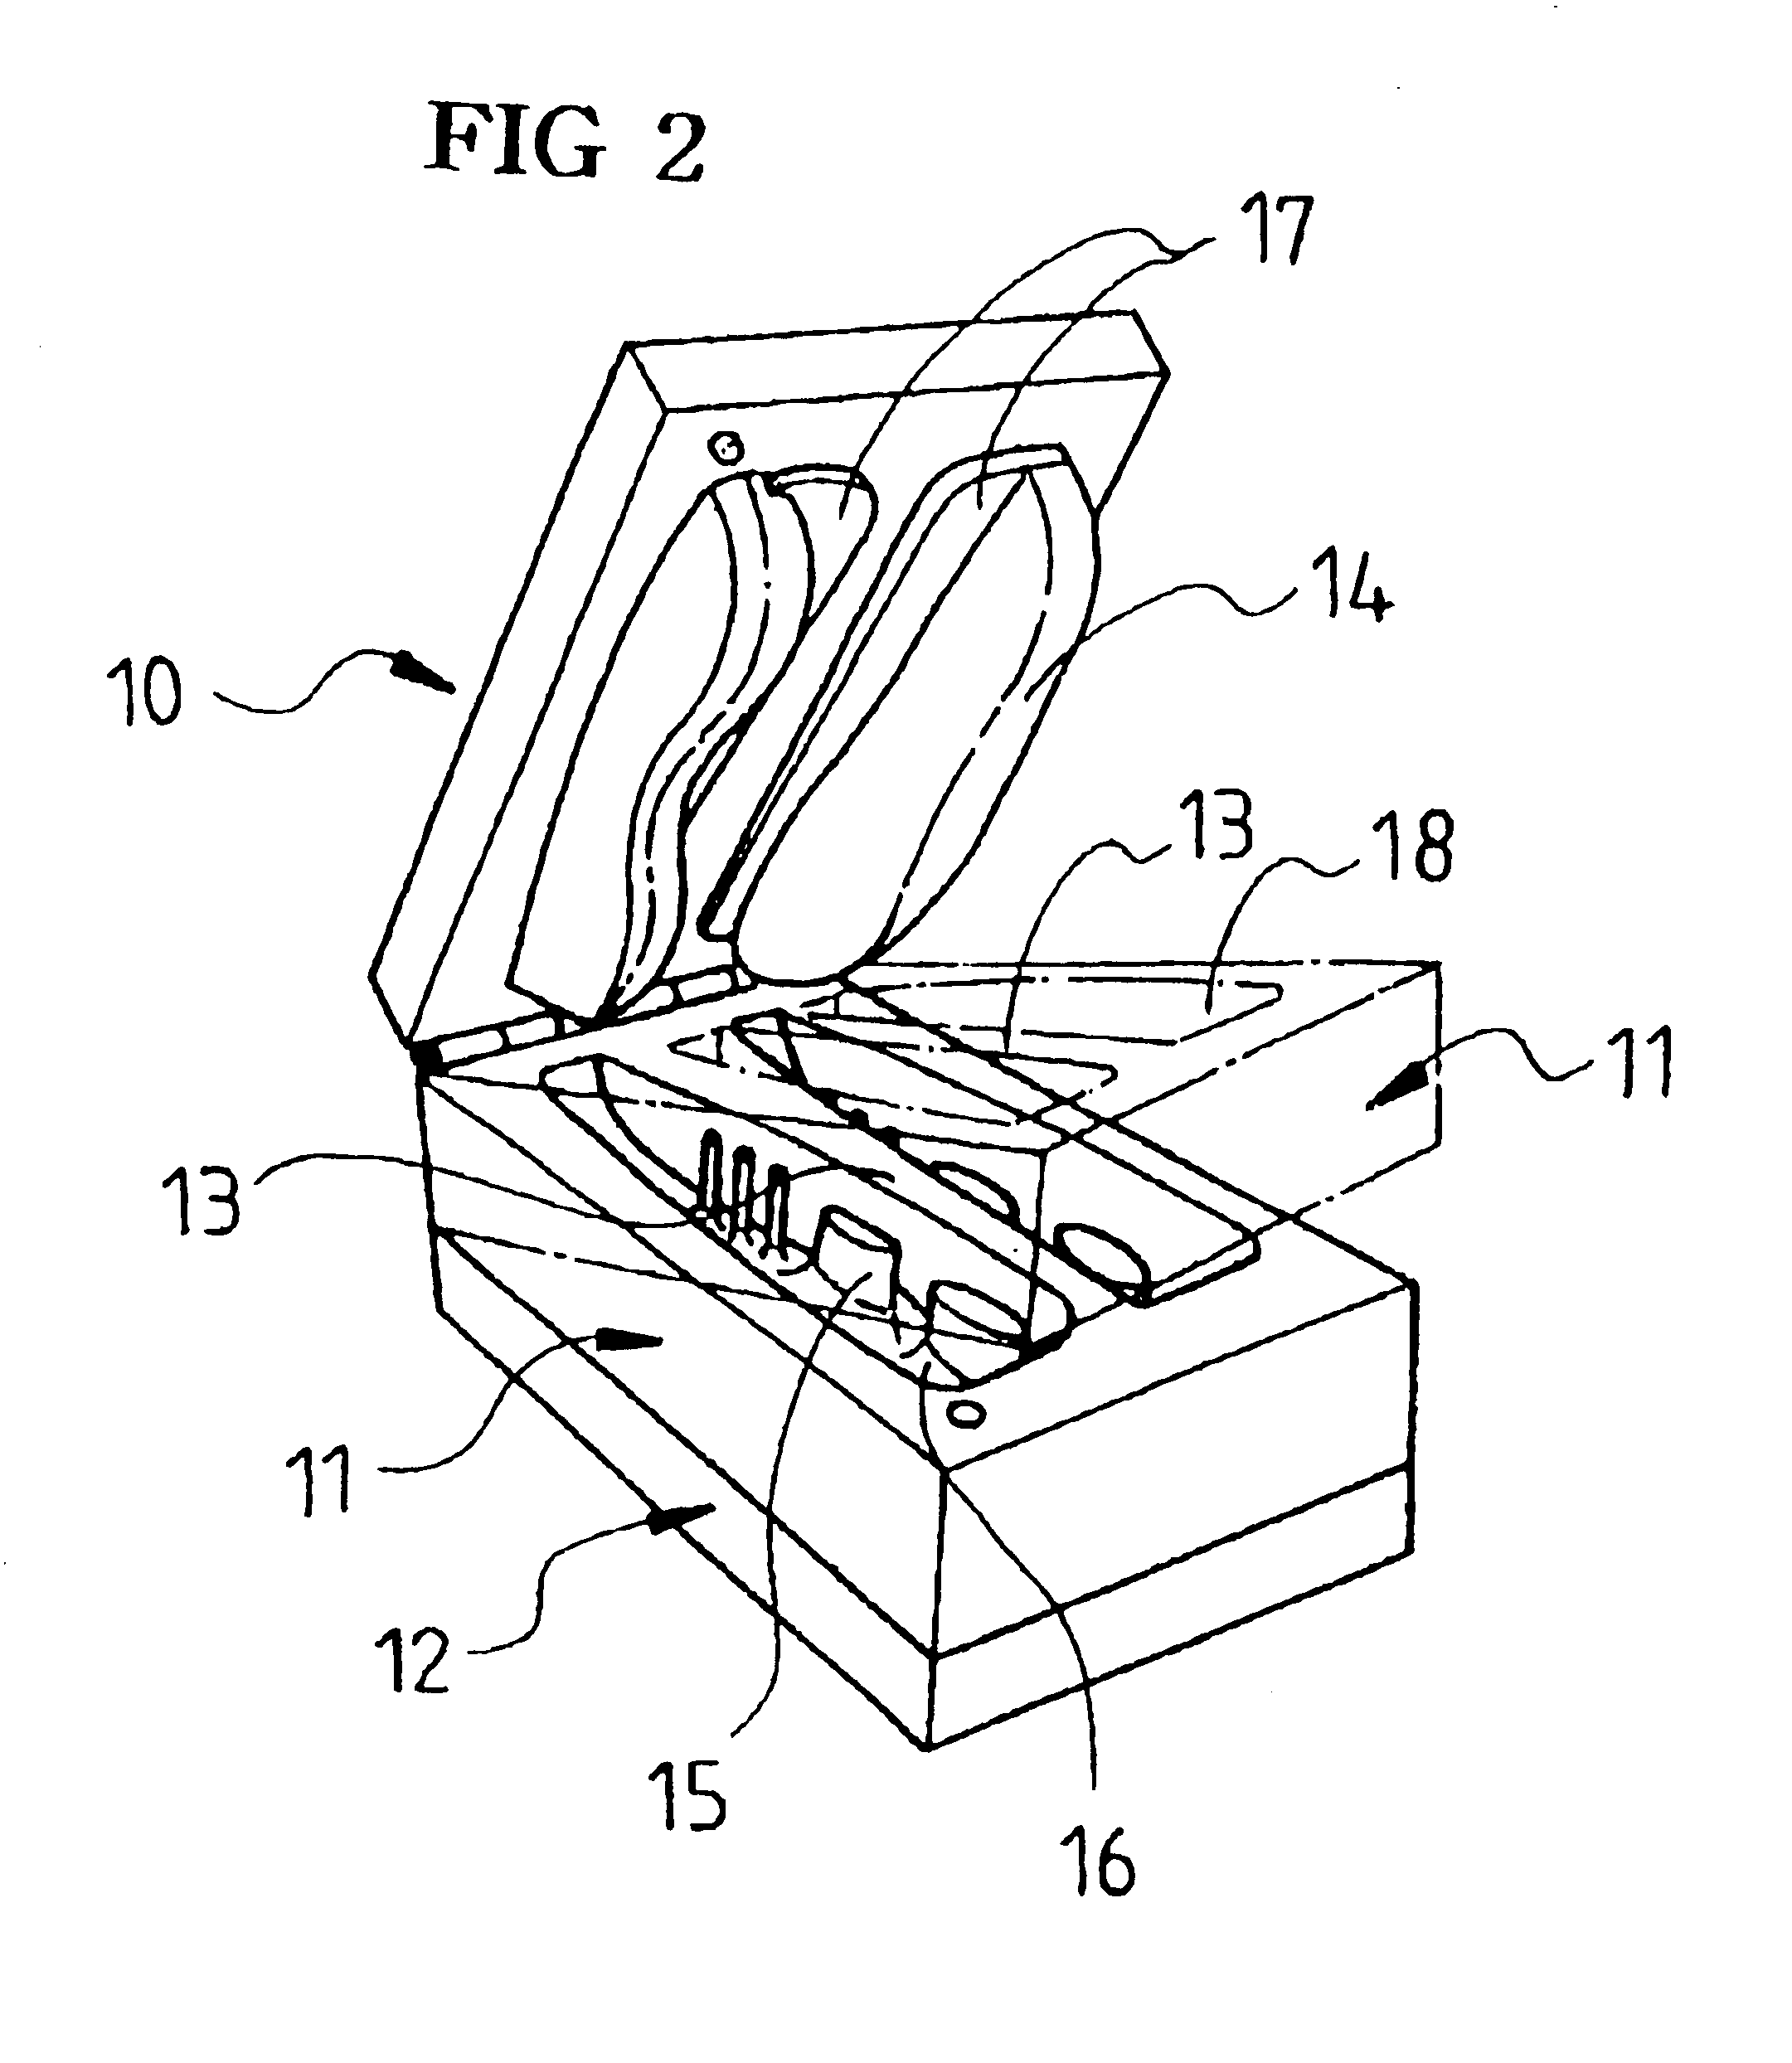 Shoe outer sole, method for its manufacture, and mold therefor